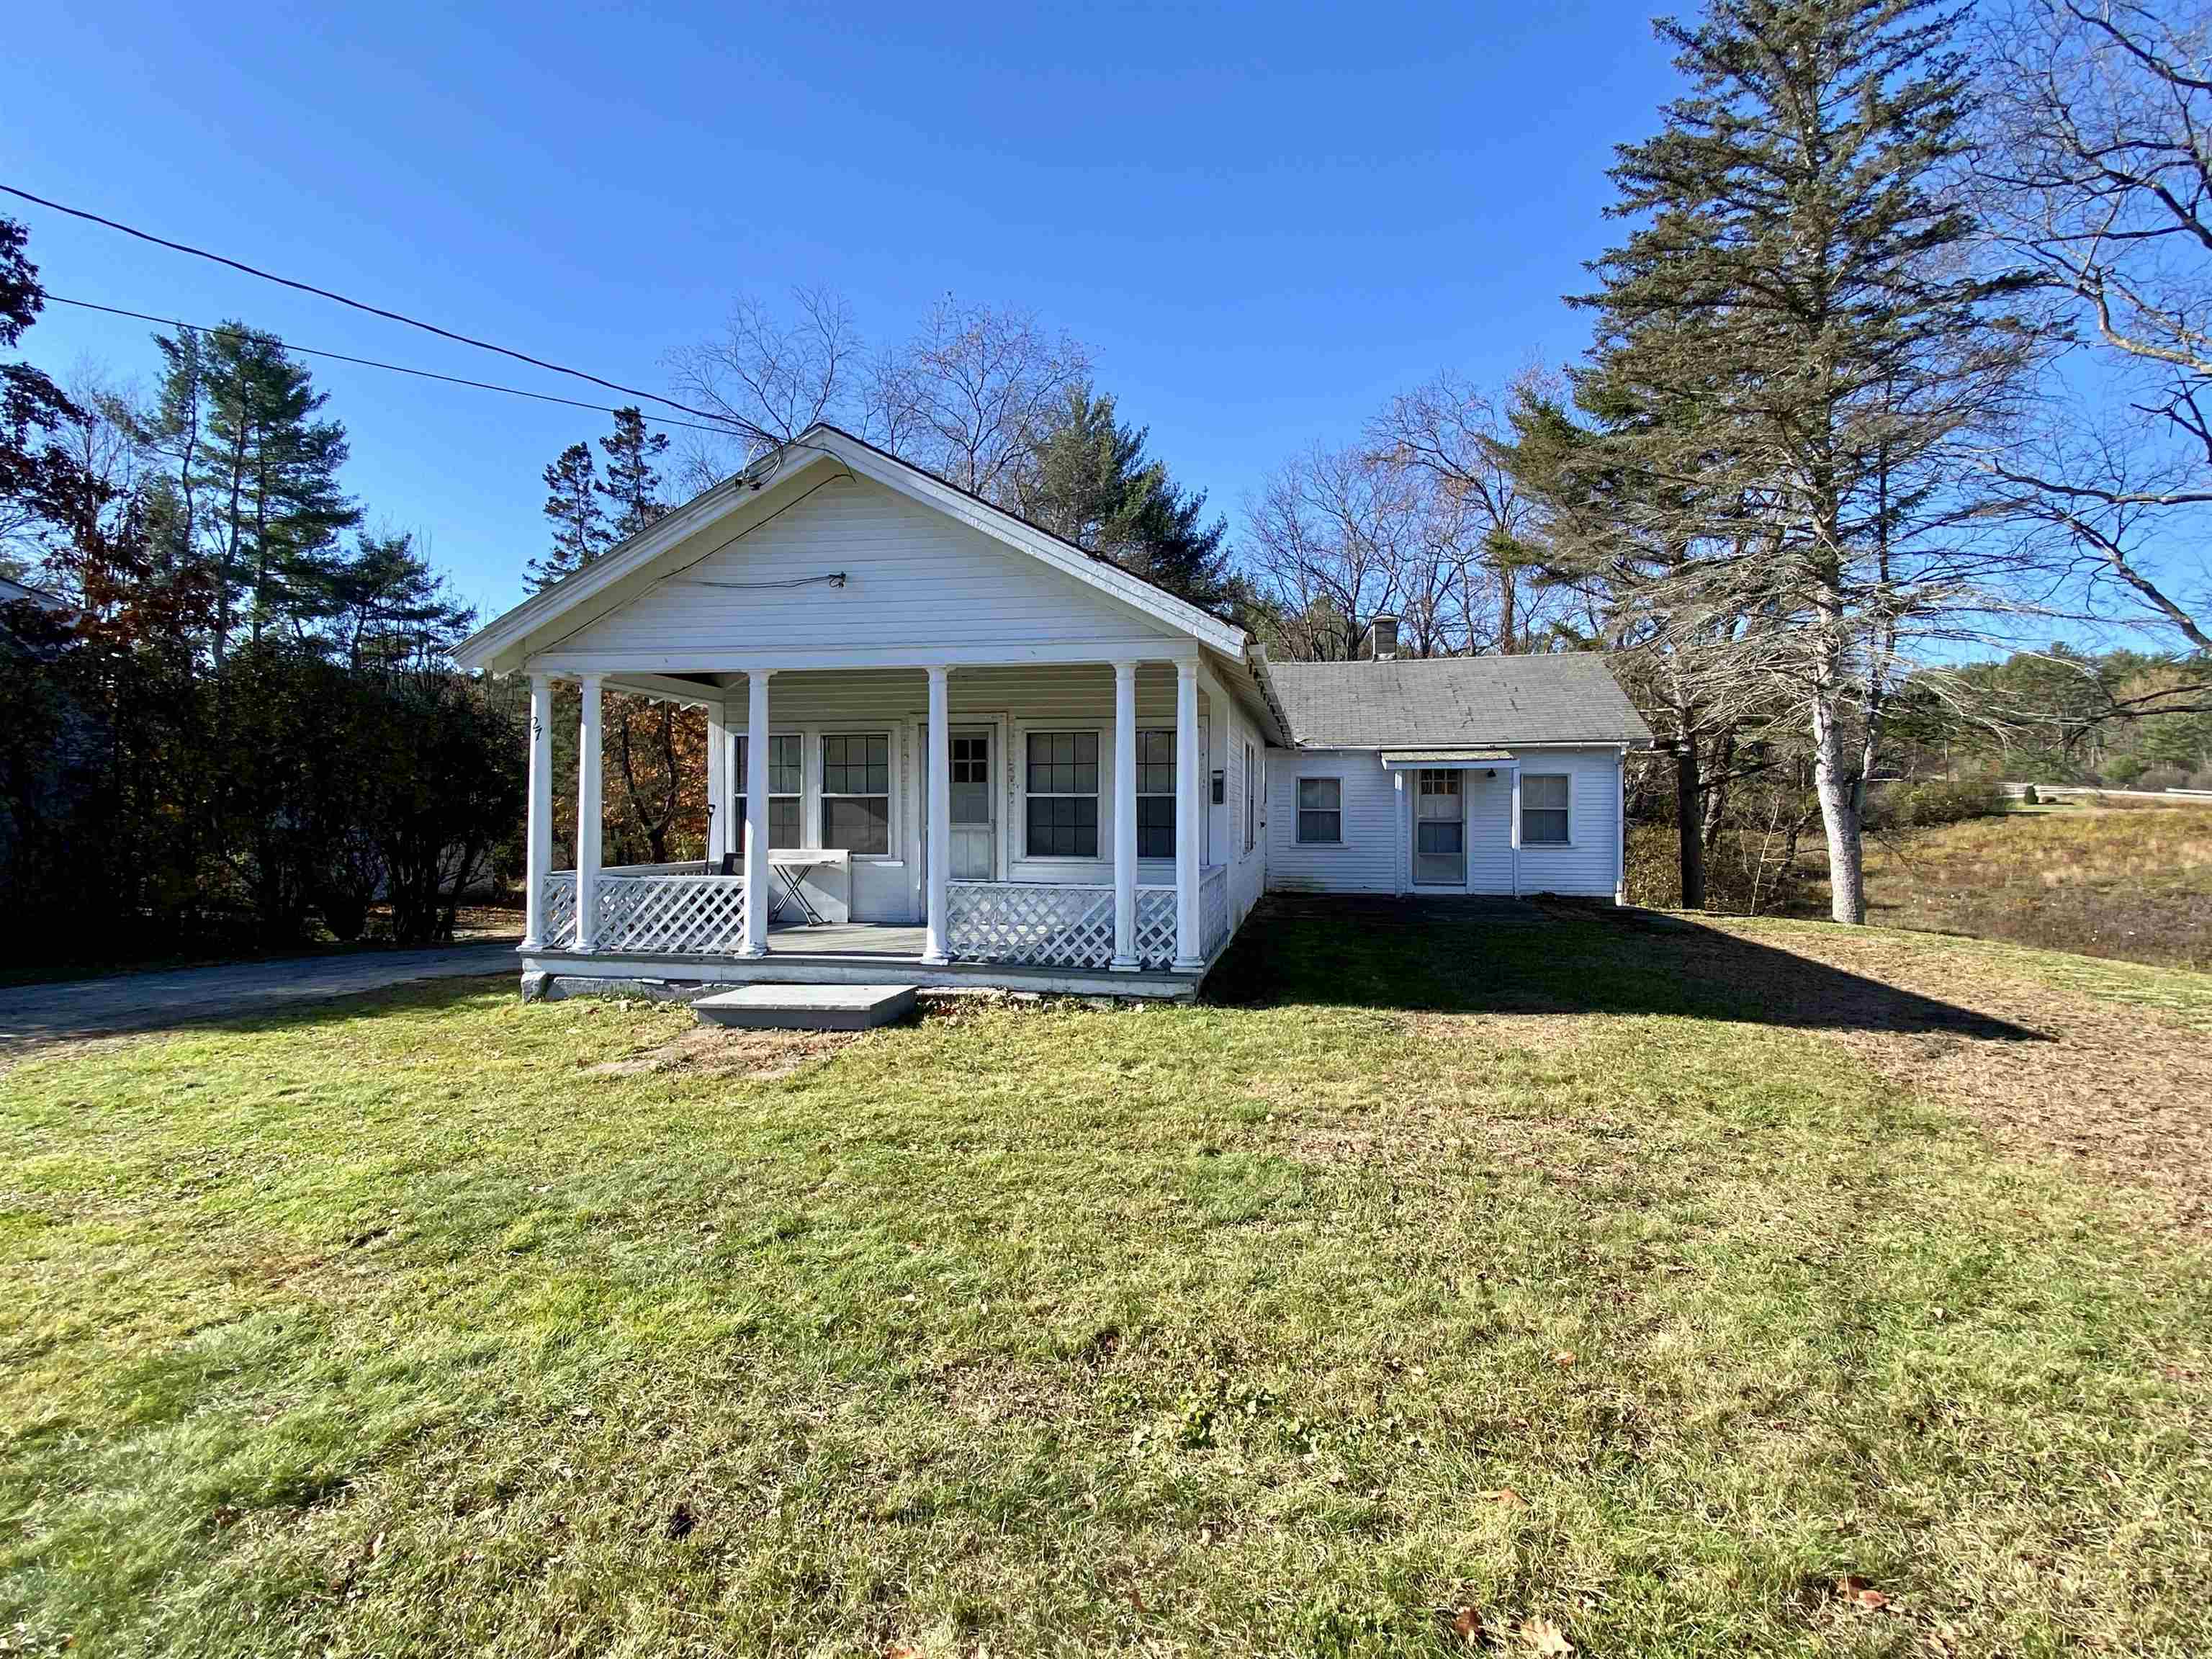 Newport NH 03773 Home for sale $List Price is $200,000